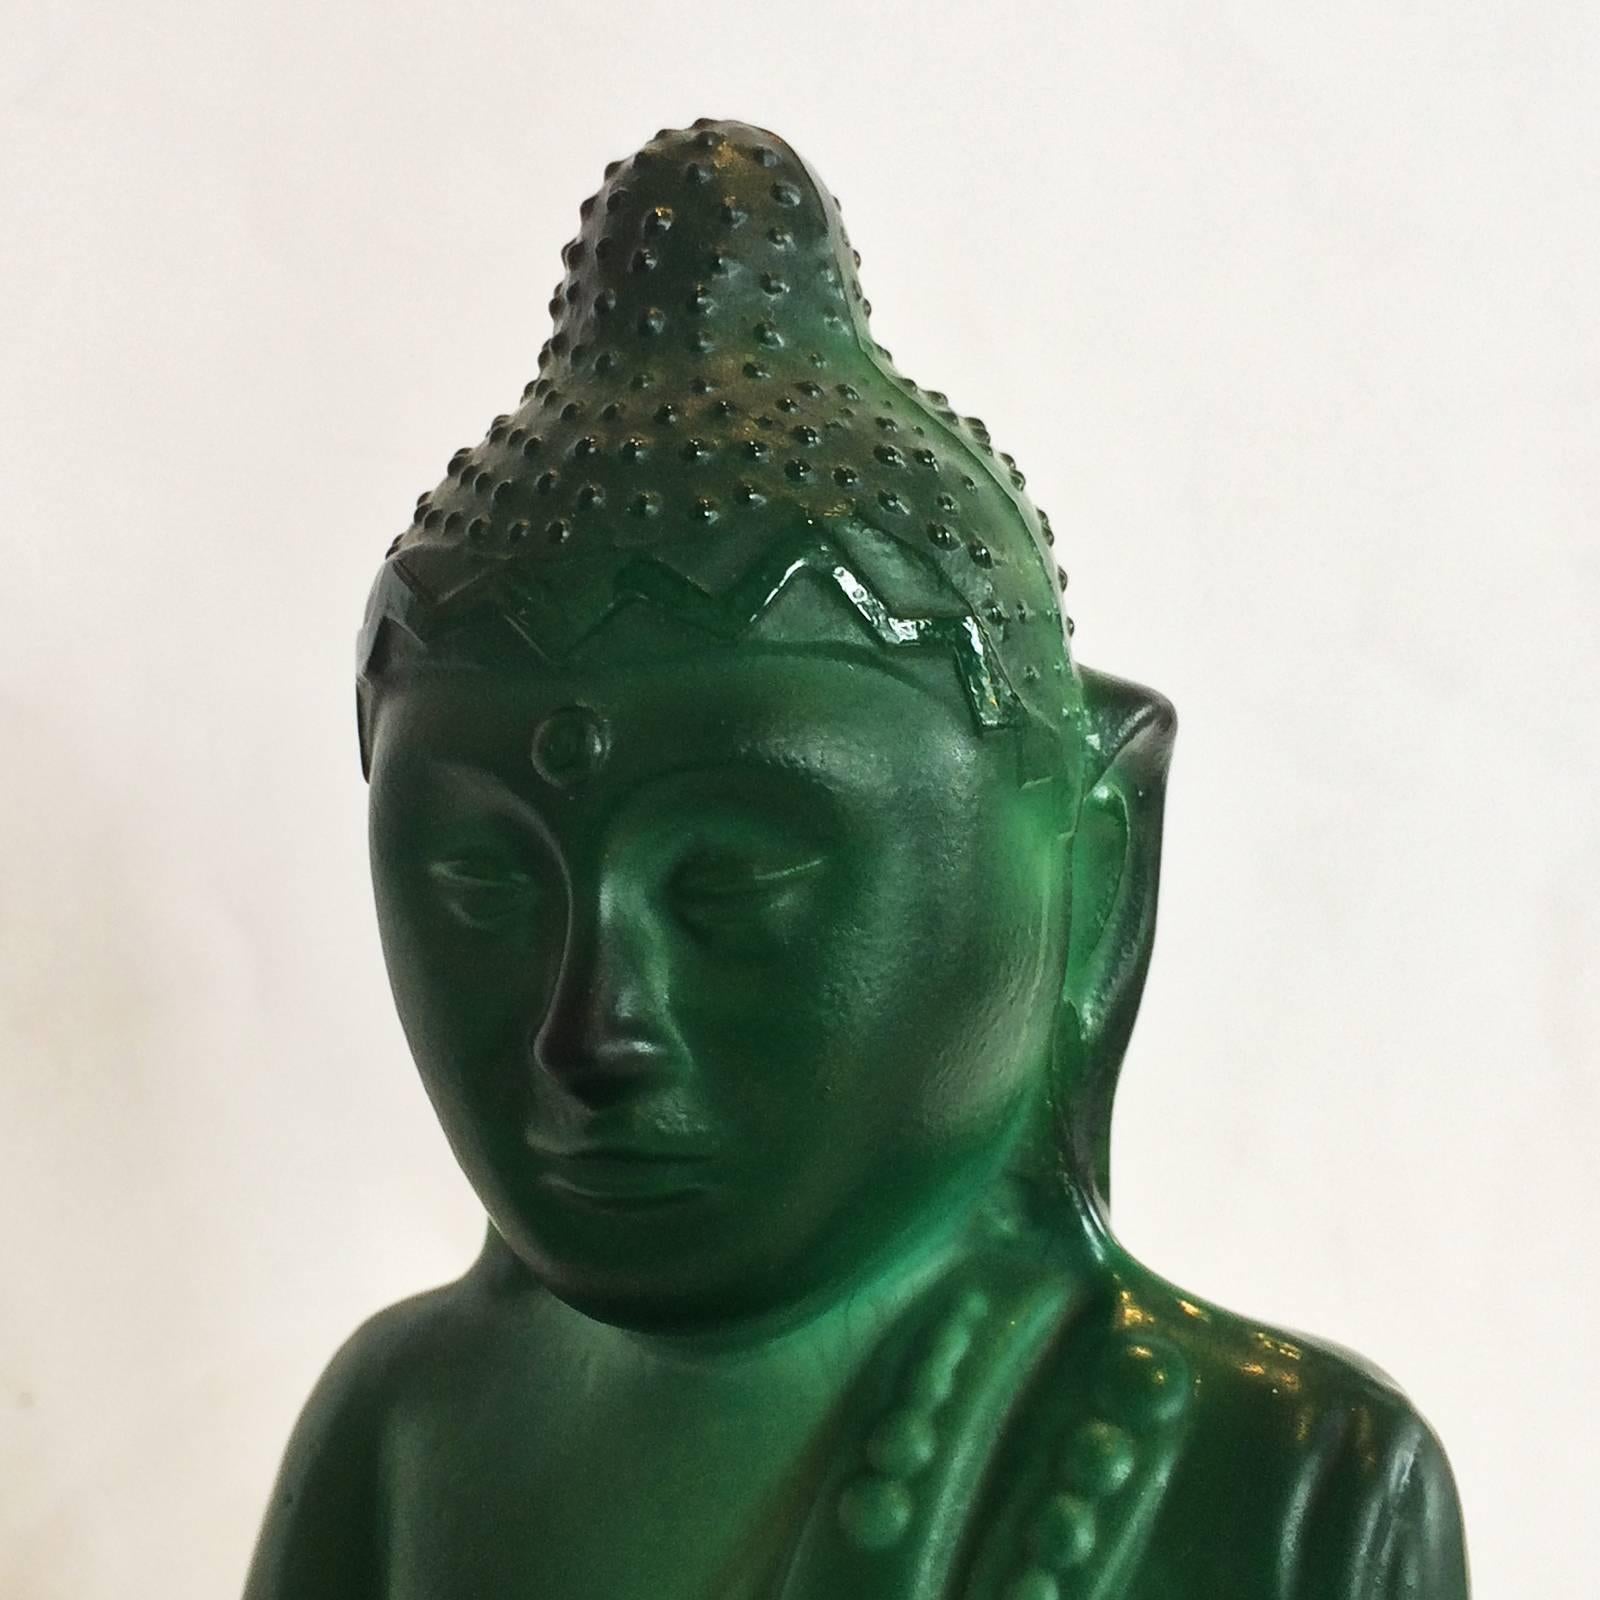 Art Deco statue Buddha Malachite Czech glass, by Curt Schlevogt Ingrid glass line, in fine detail. Overlapping vertical leaf detail for full perimeter of base. In fine condition with no Damage, no losses or repairs. Very fine grain / veins in the